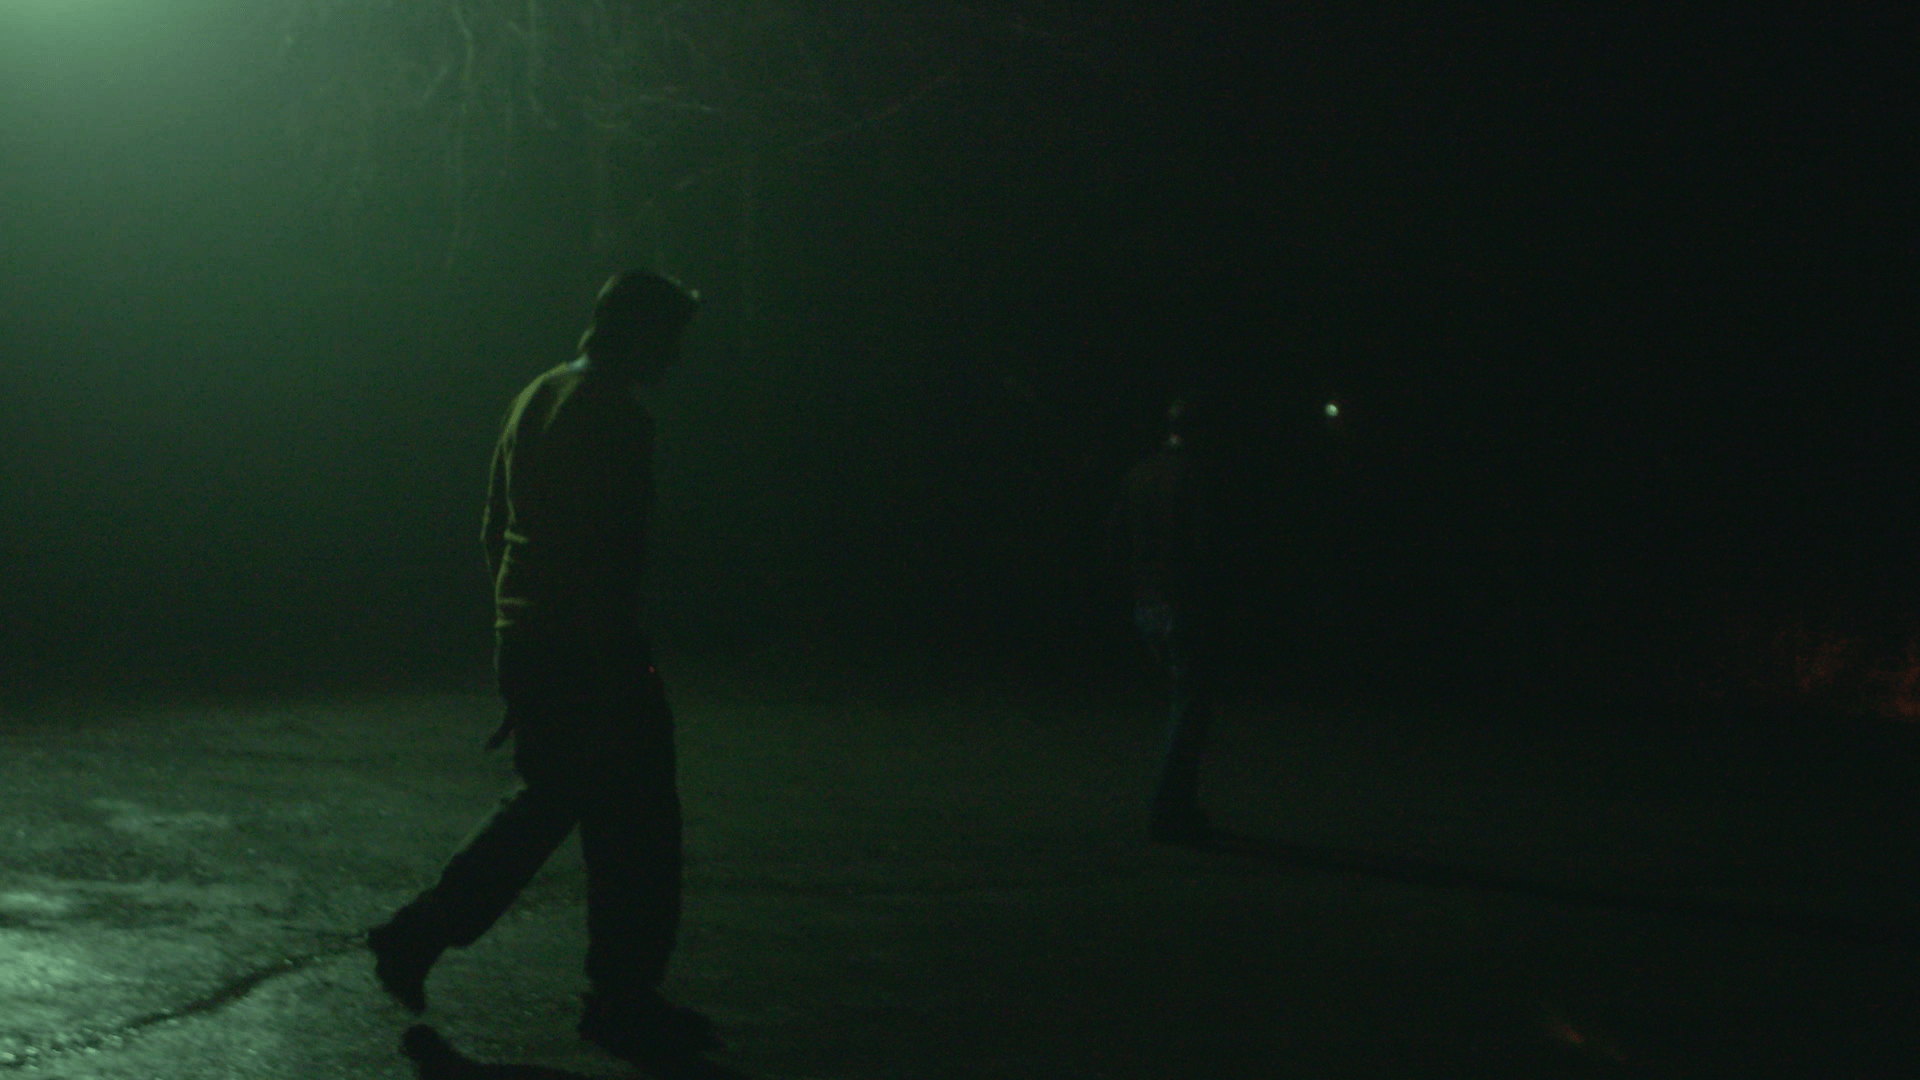 Still from Storming. A person walks on a dark road.